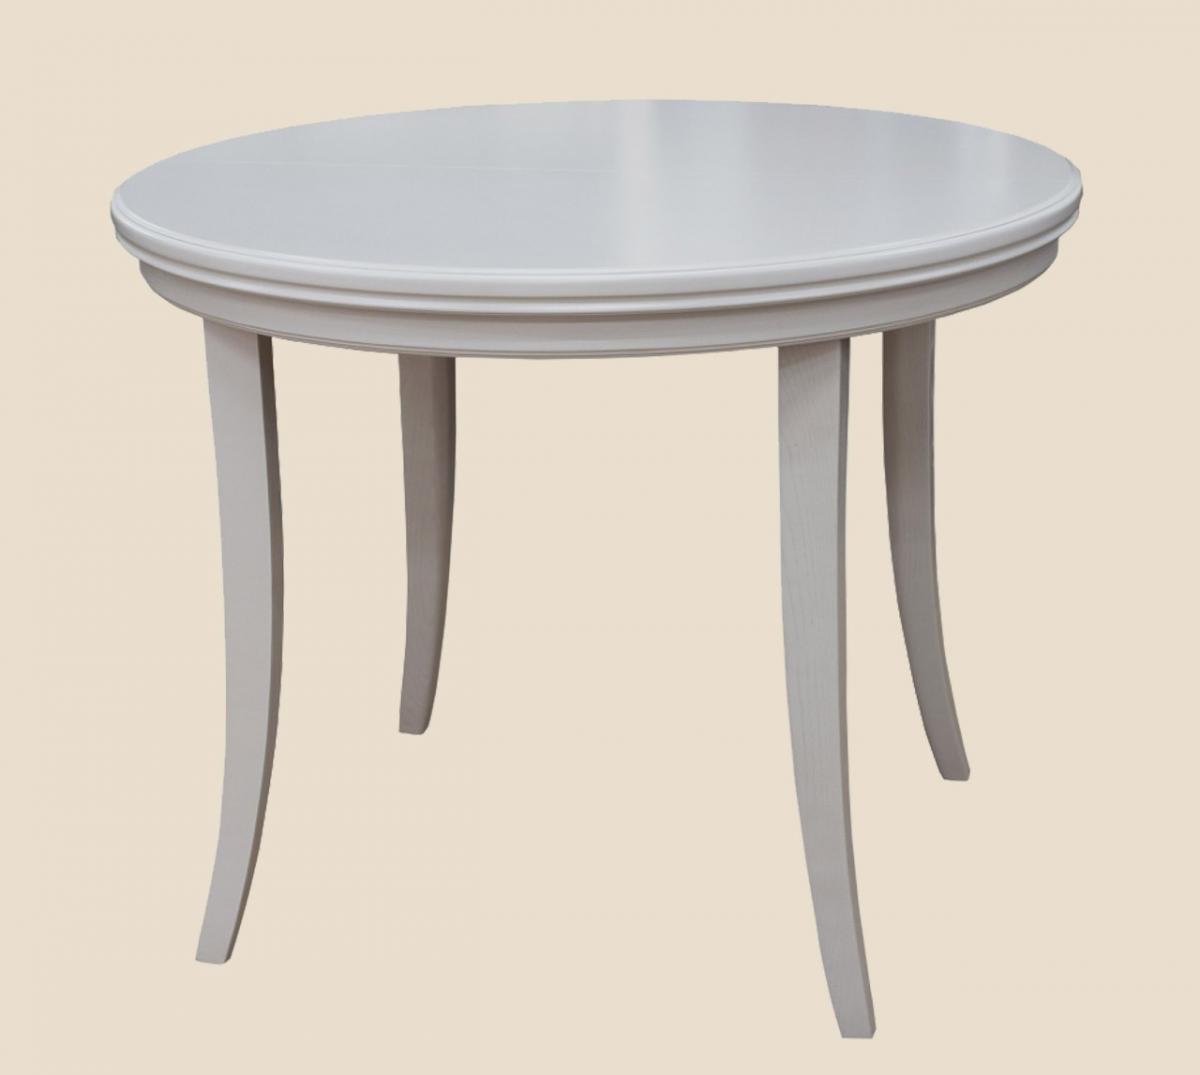 Table "Provence" is round